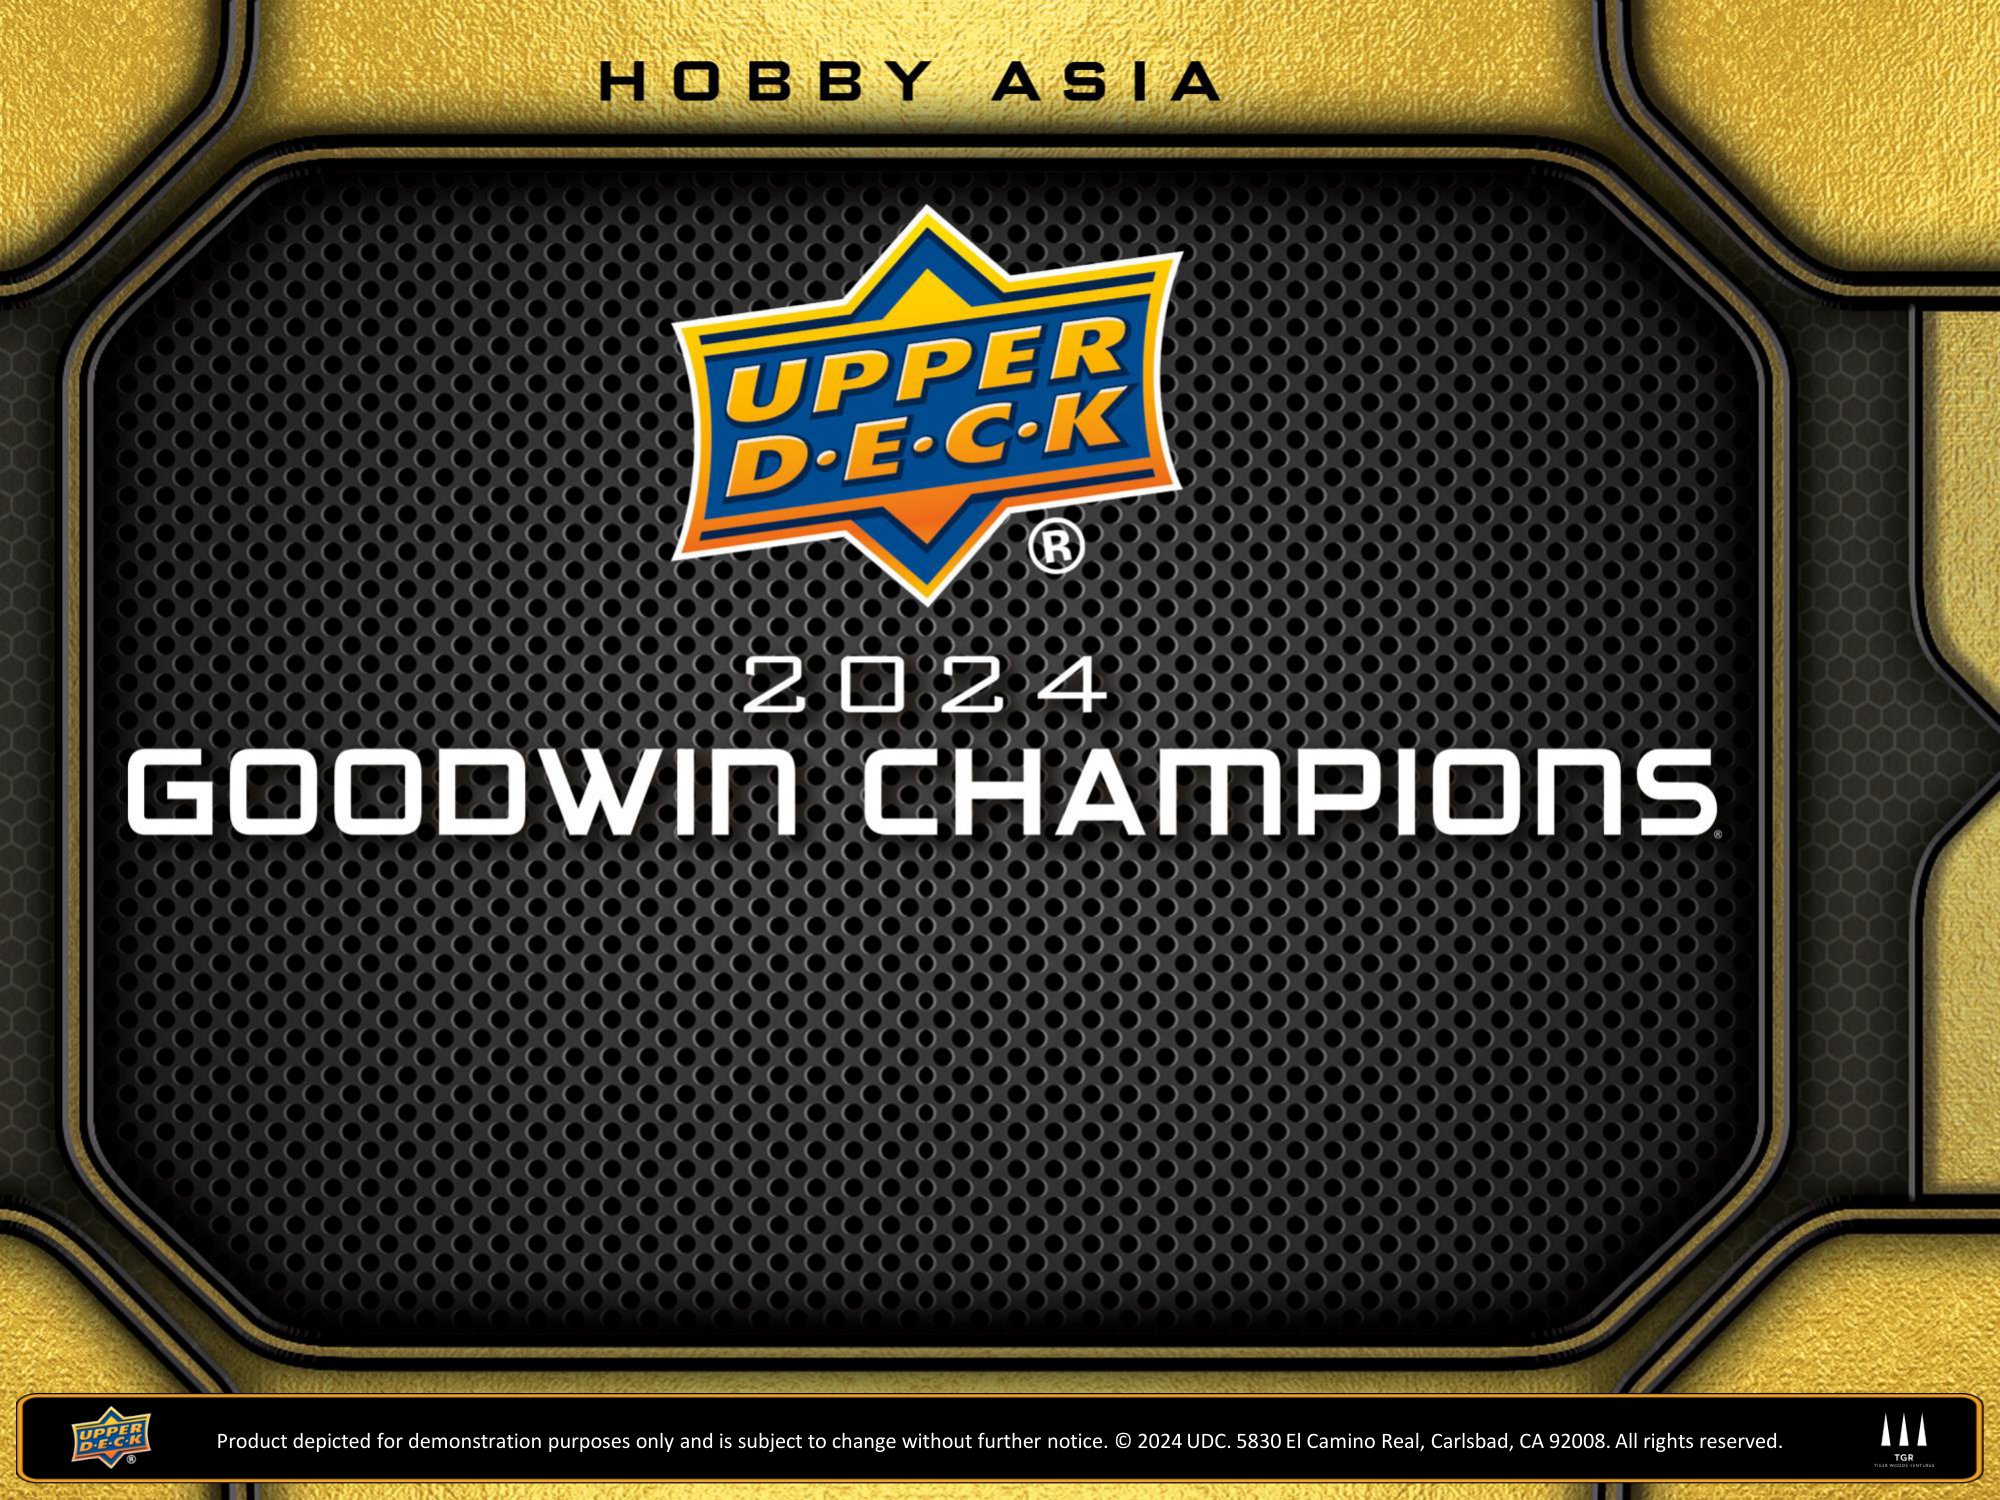 2024 UPPER DECK GOODWIN CHAMPIONS HOBBY ASIA【製品情報】 | Trading Card Journal